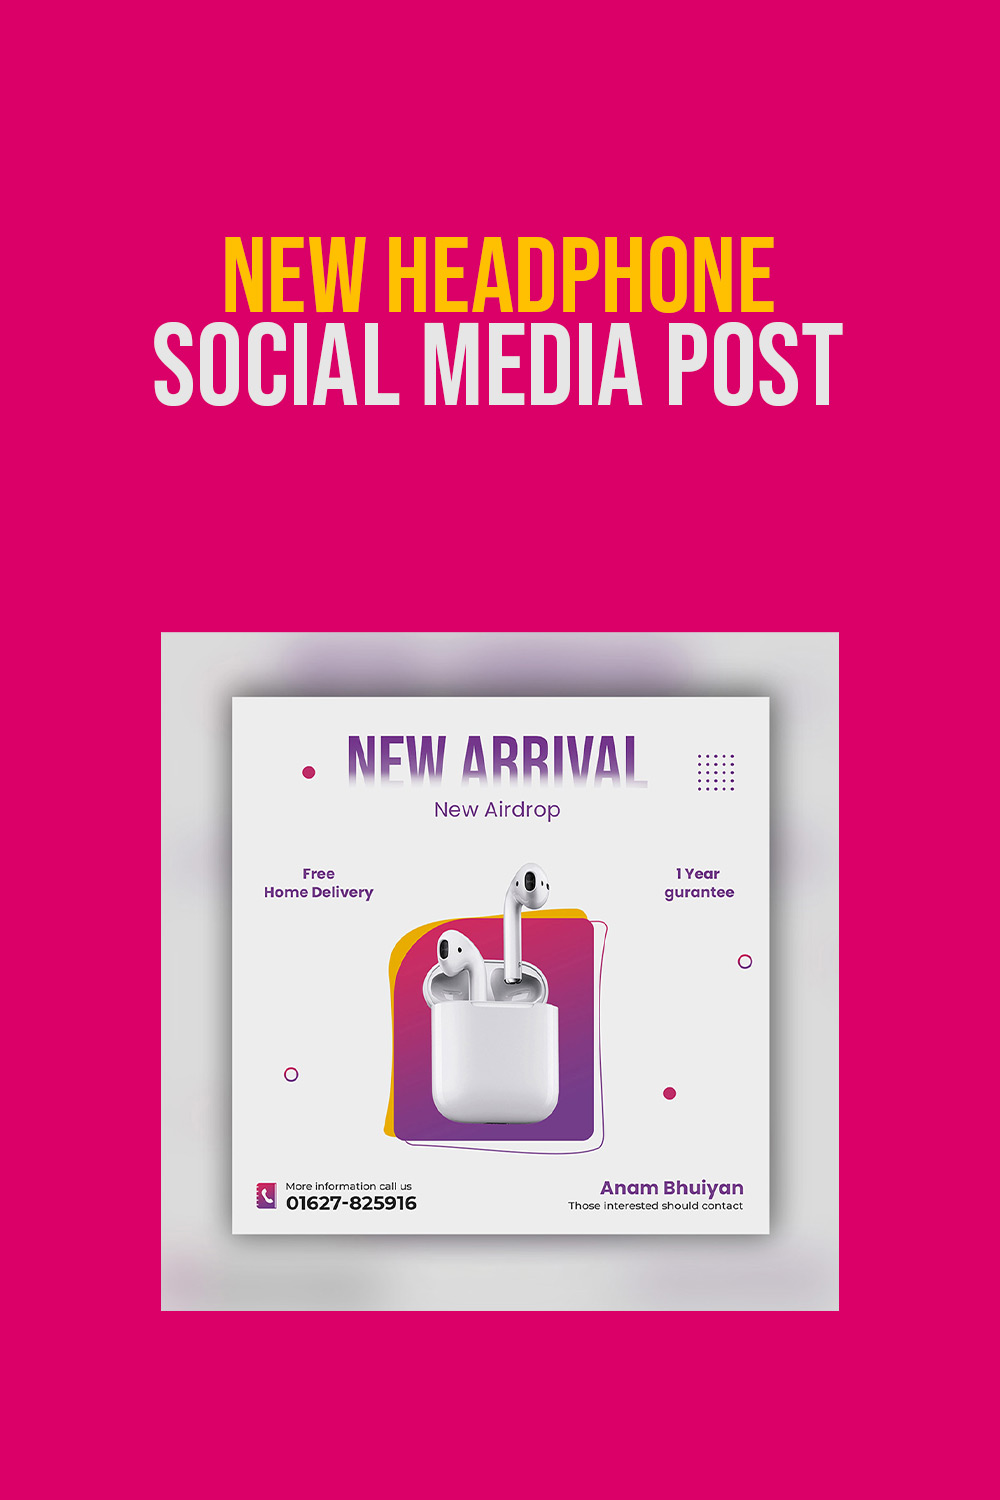 New headphone social media templates or web banner- only $4 pinterest preview image.